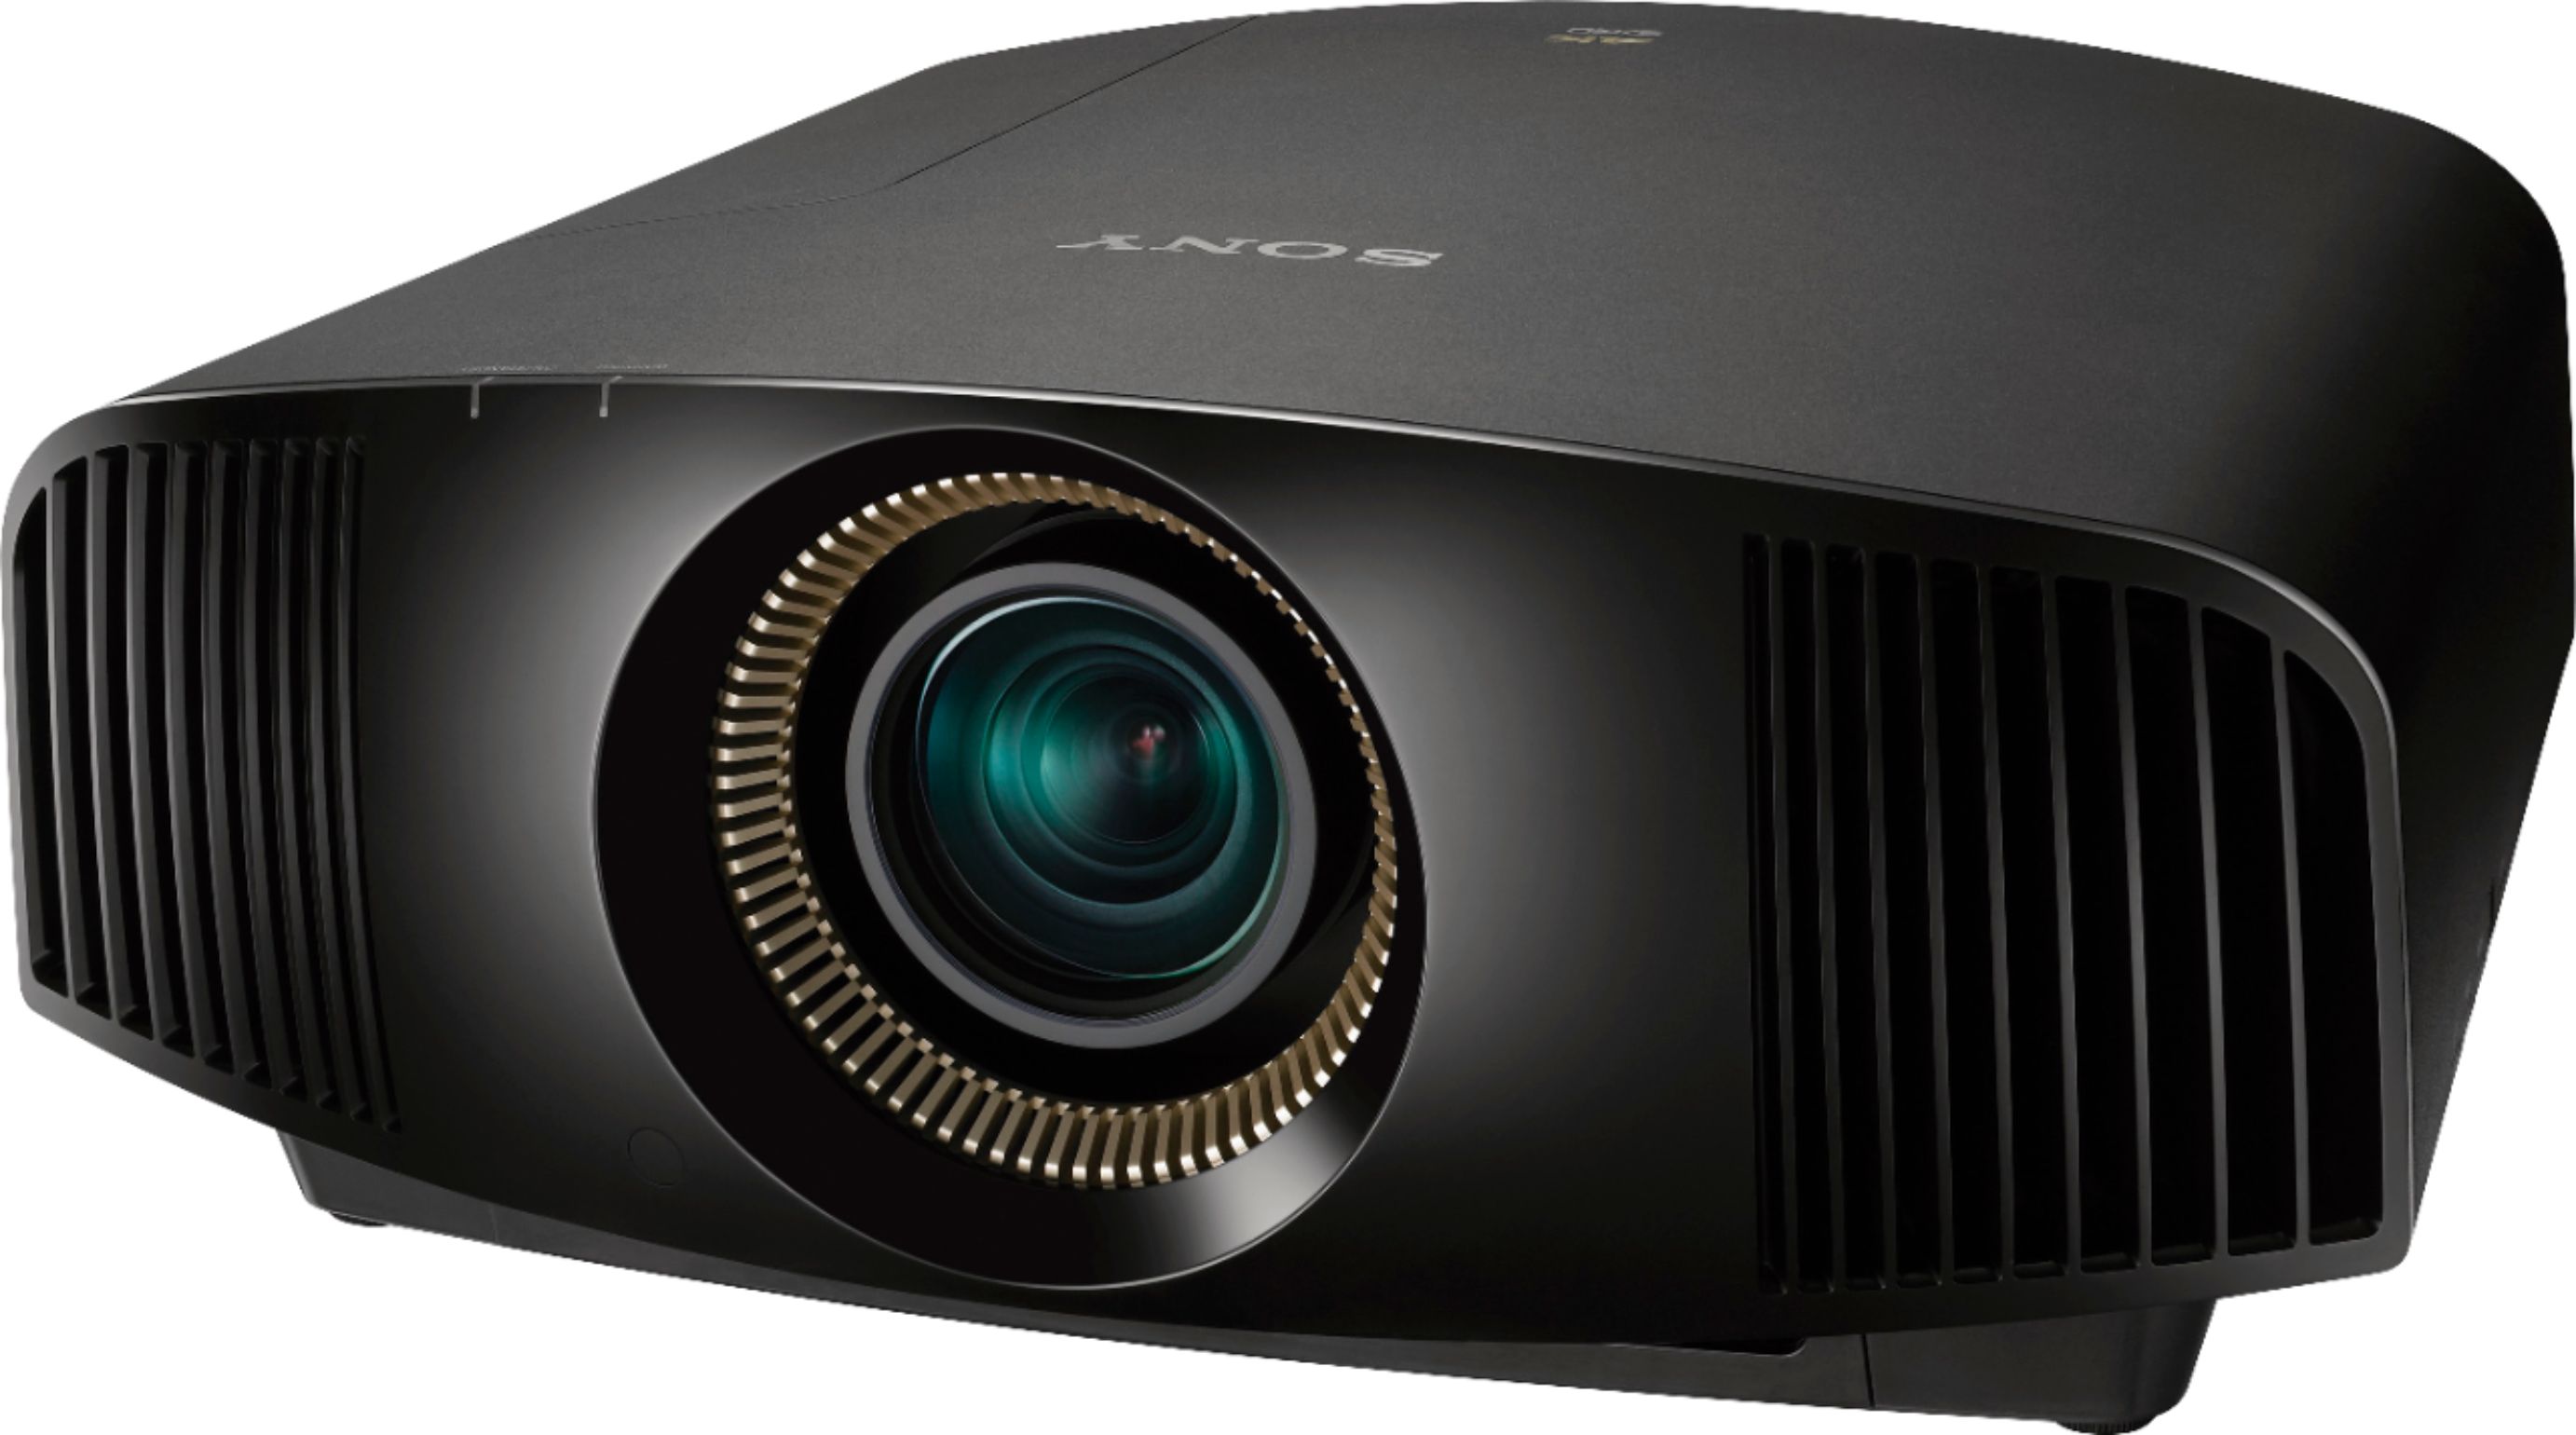 Angle View: Sony - 4K HDR Home Theater Projector - Black